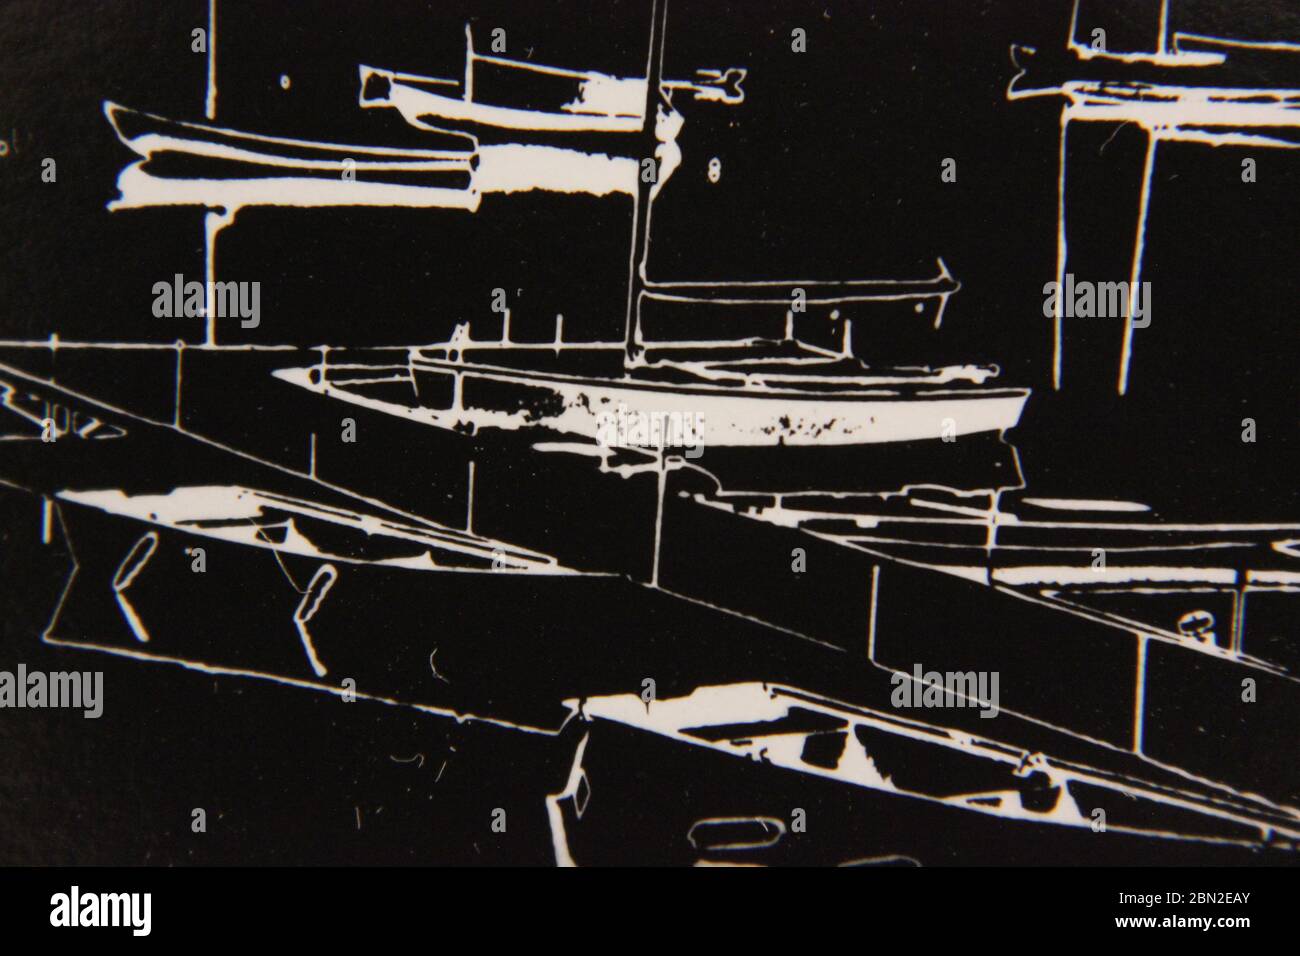 Fine 70s vintage black and white extreme photography of a marina full of recreational boats. Stock Photo